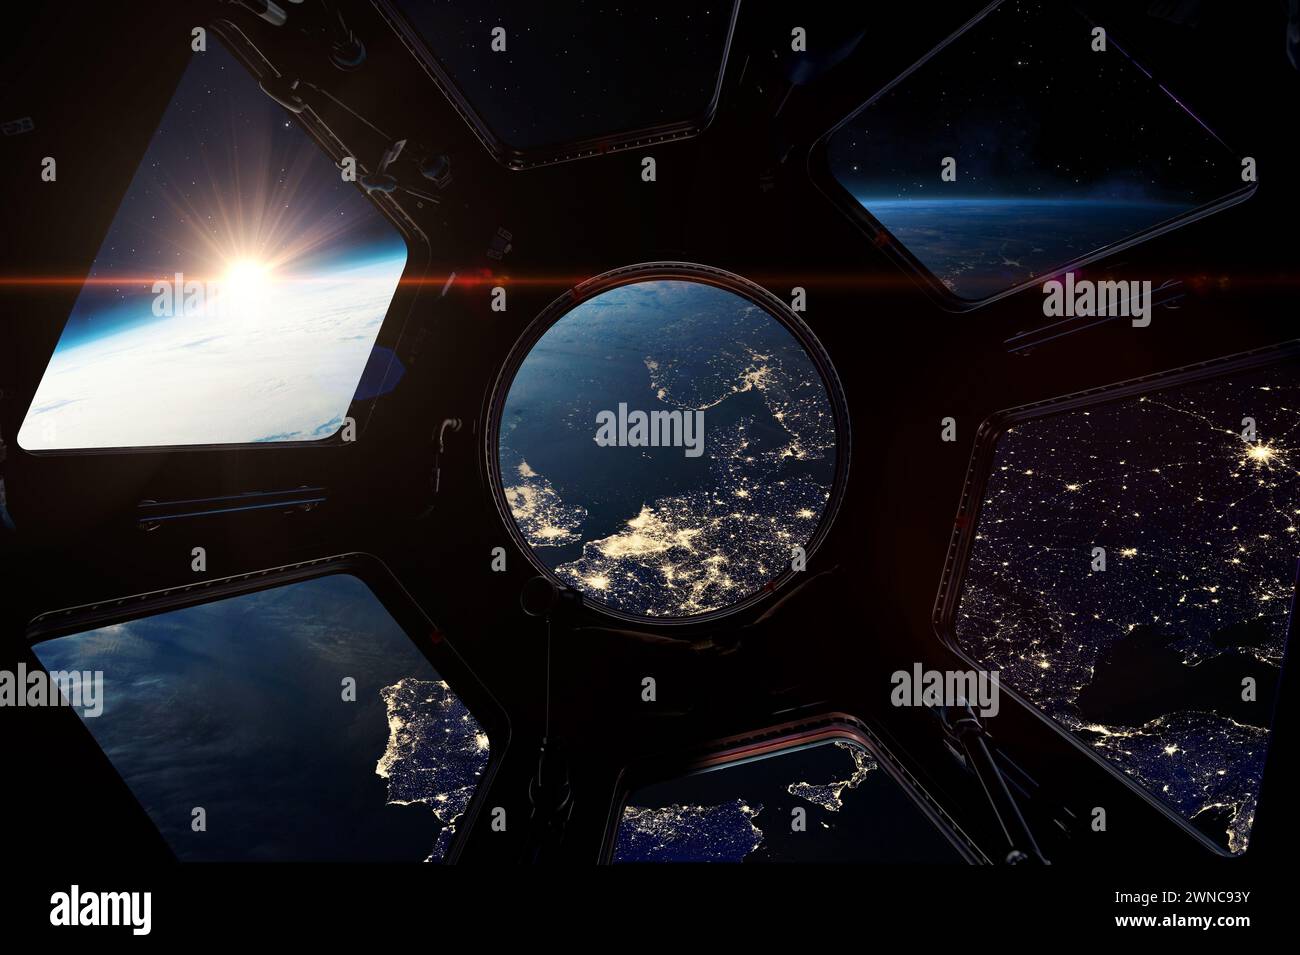 Europe at night. View on night Earth from porthole on space station. ISS window. International space station. Elements of this image furnished by NASA Stock Photo